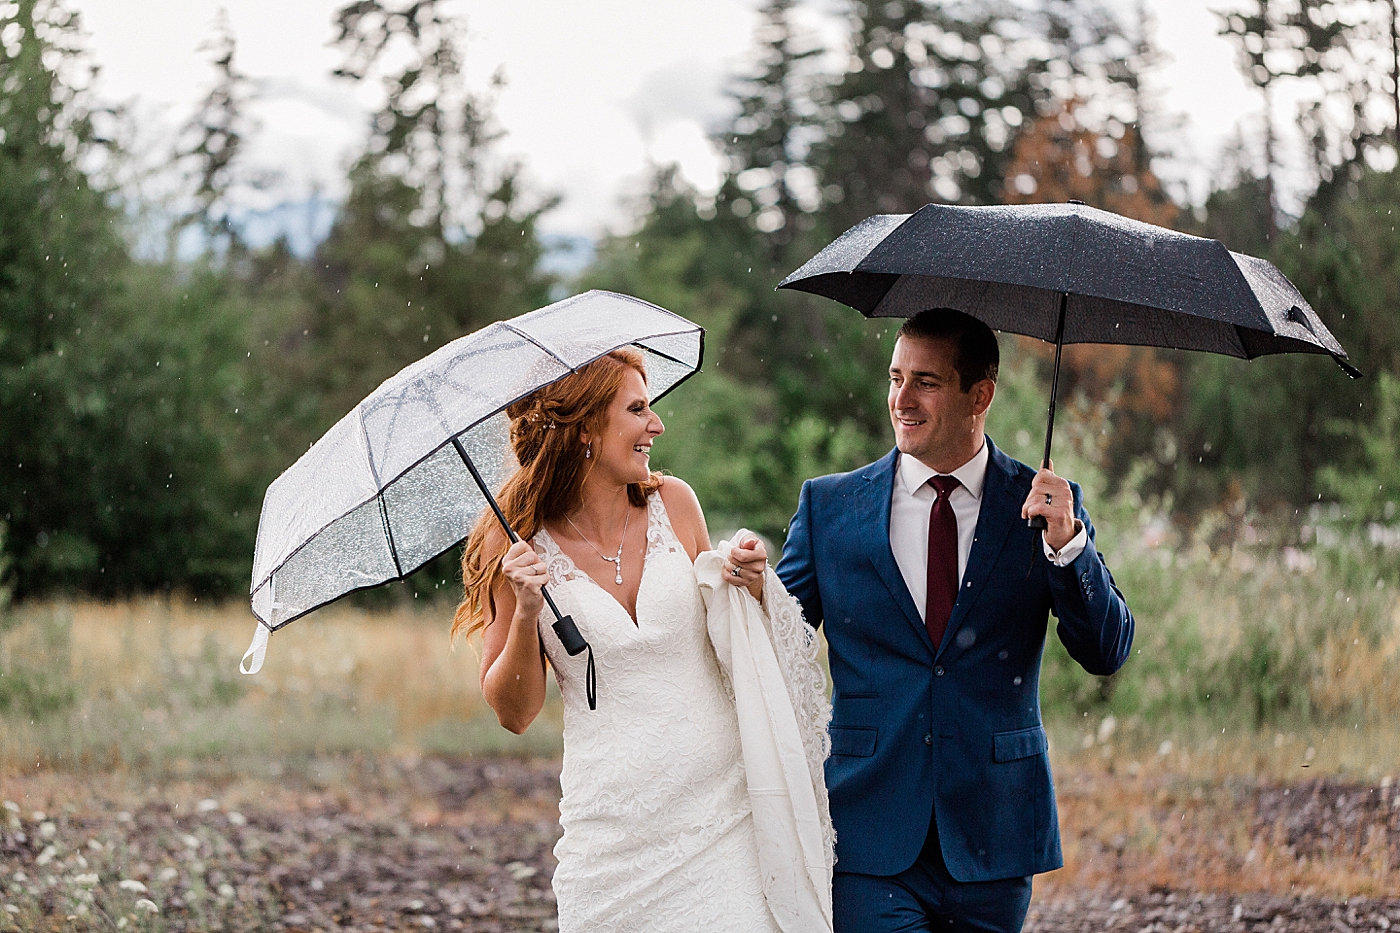 Rainy first look between bride and groom. Photographed by PNW Wedding Photographer, Megan Montalvo Photography. 